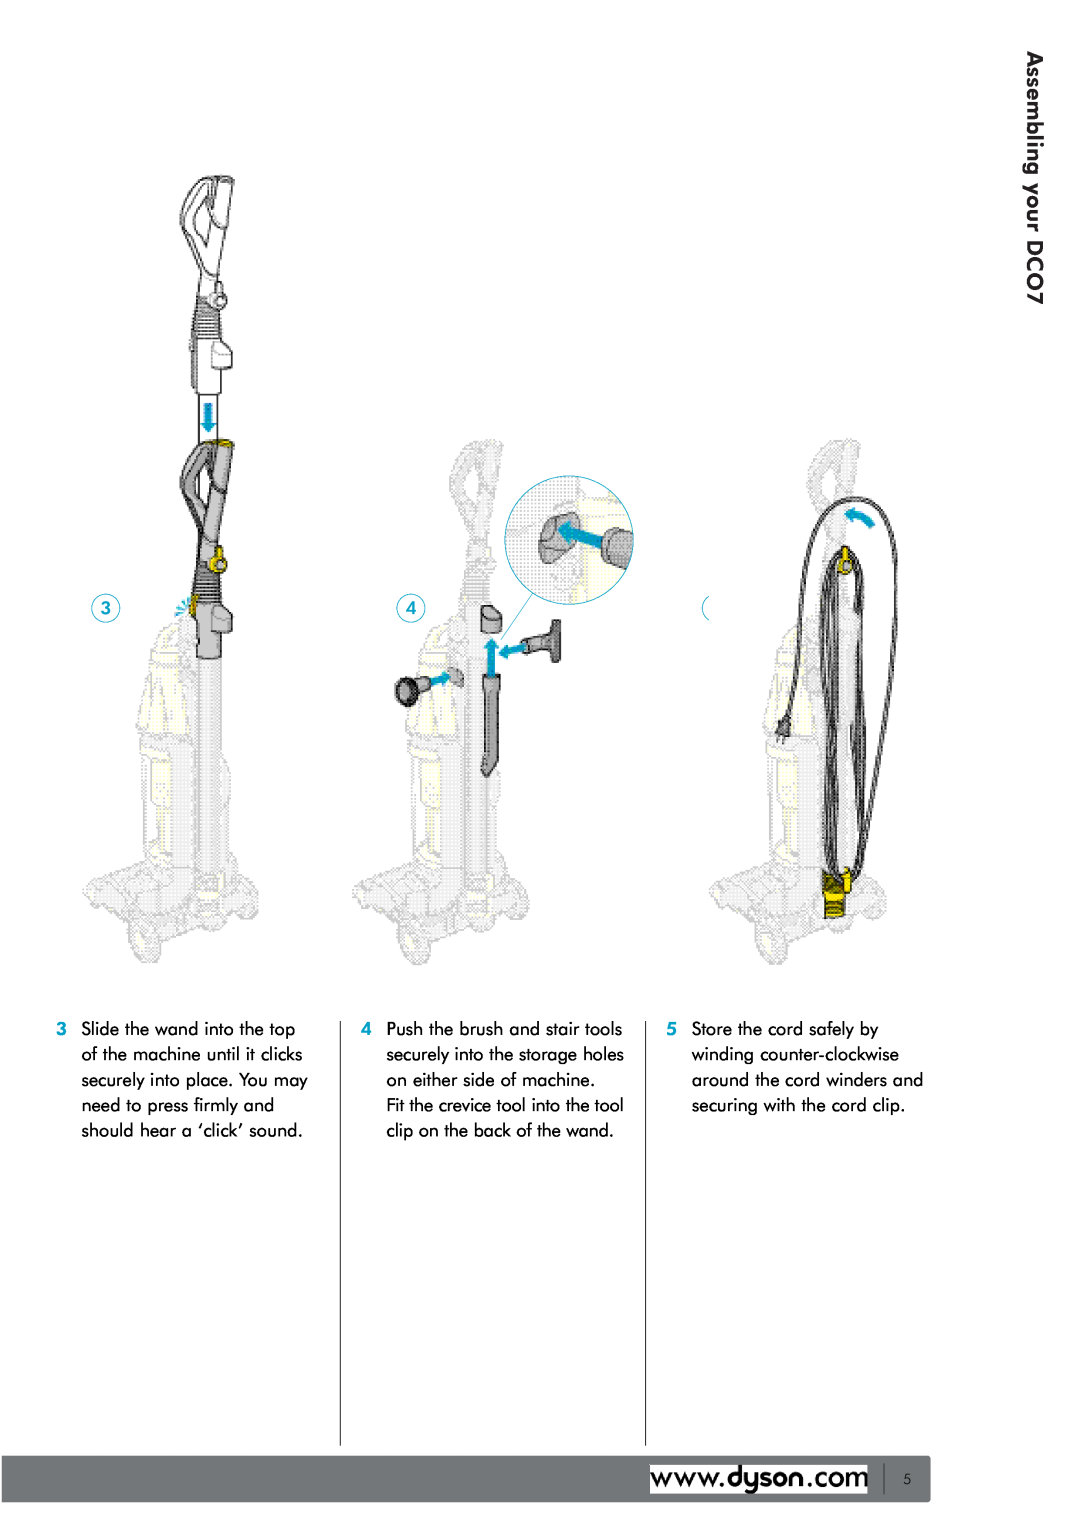 Dyson water filter owner manual Assembling your DCO7, Fit the crevice tool into the tool clip on the back of the wand 